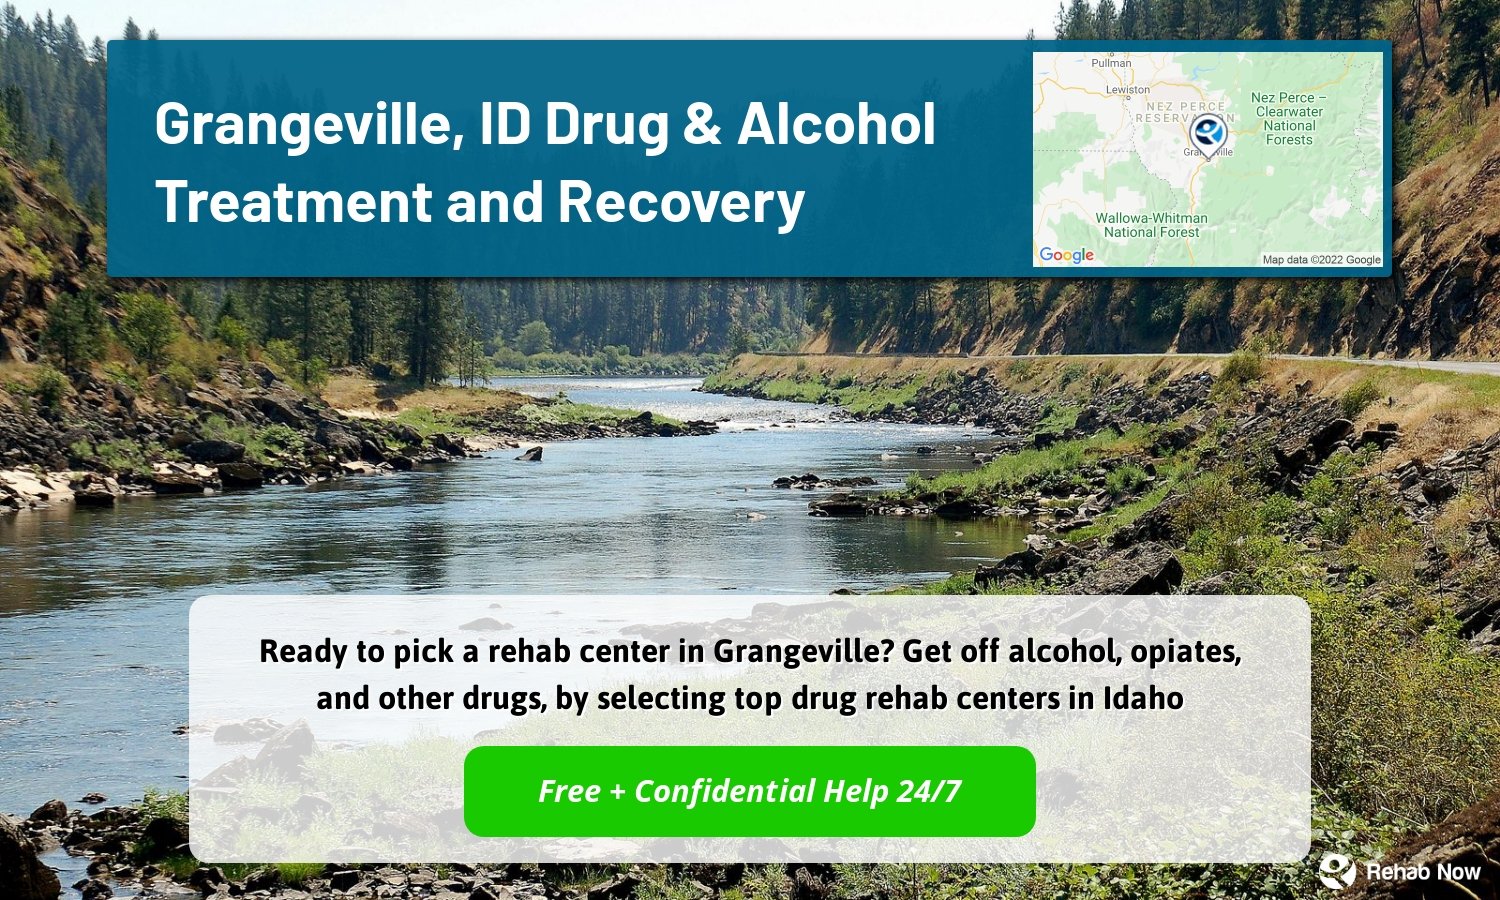 Ready to pick a rehab center in Grangeville? Get off alcohol, opiates, and other drugs, by selecting top drug rehab centers in Idaho